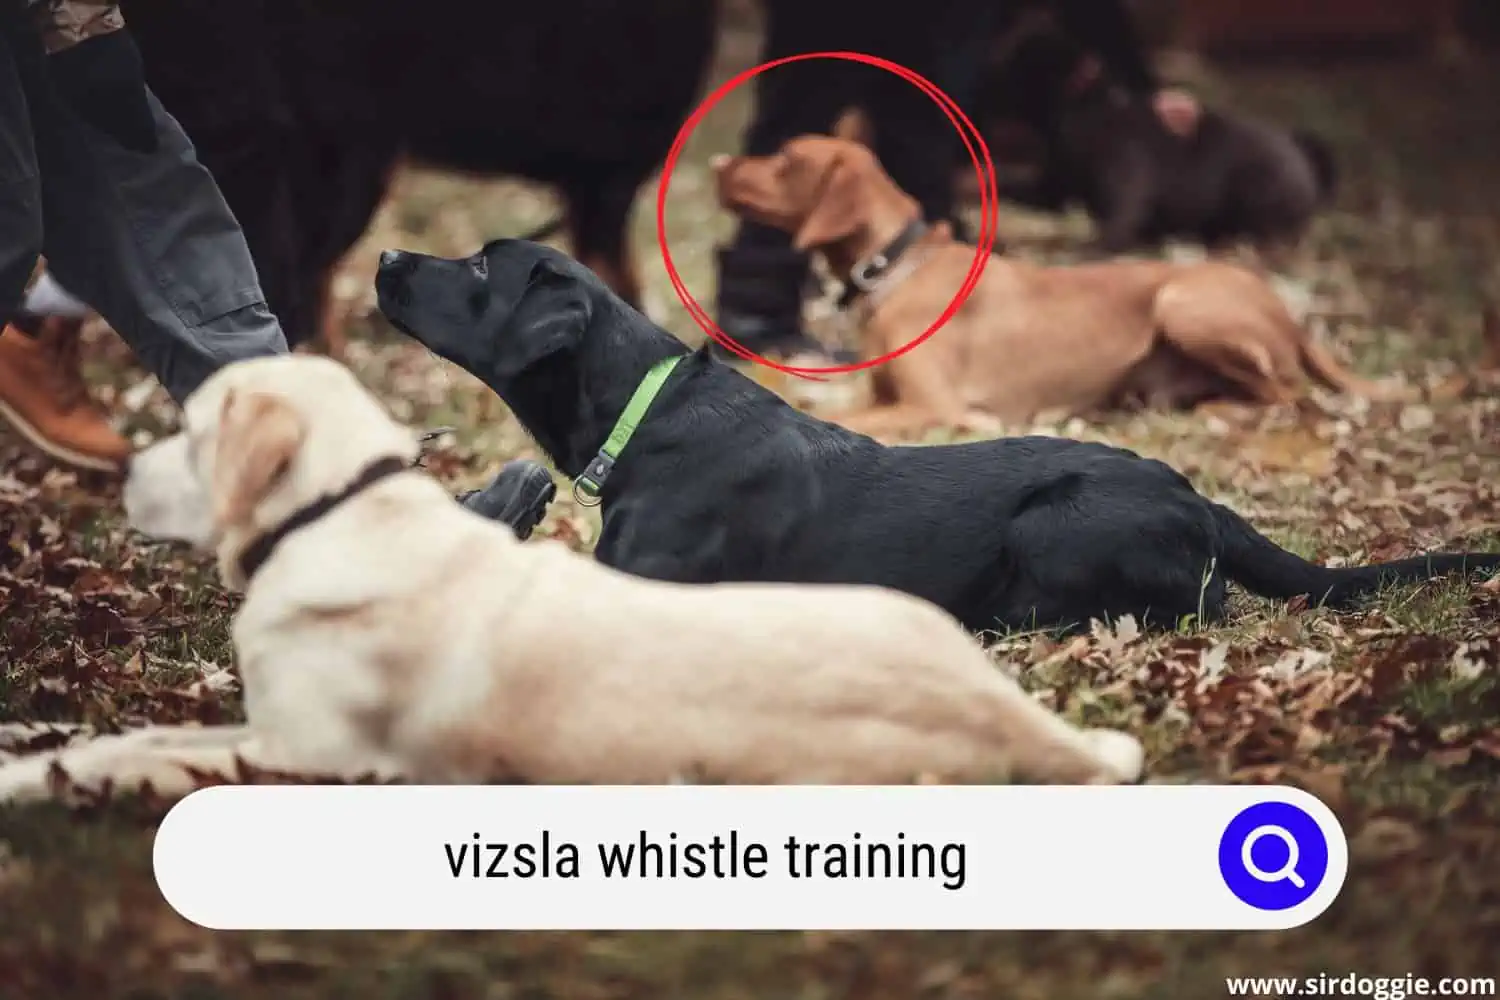 Vizsla on training with other dogs